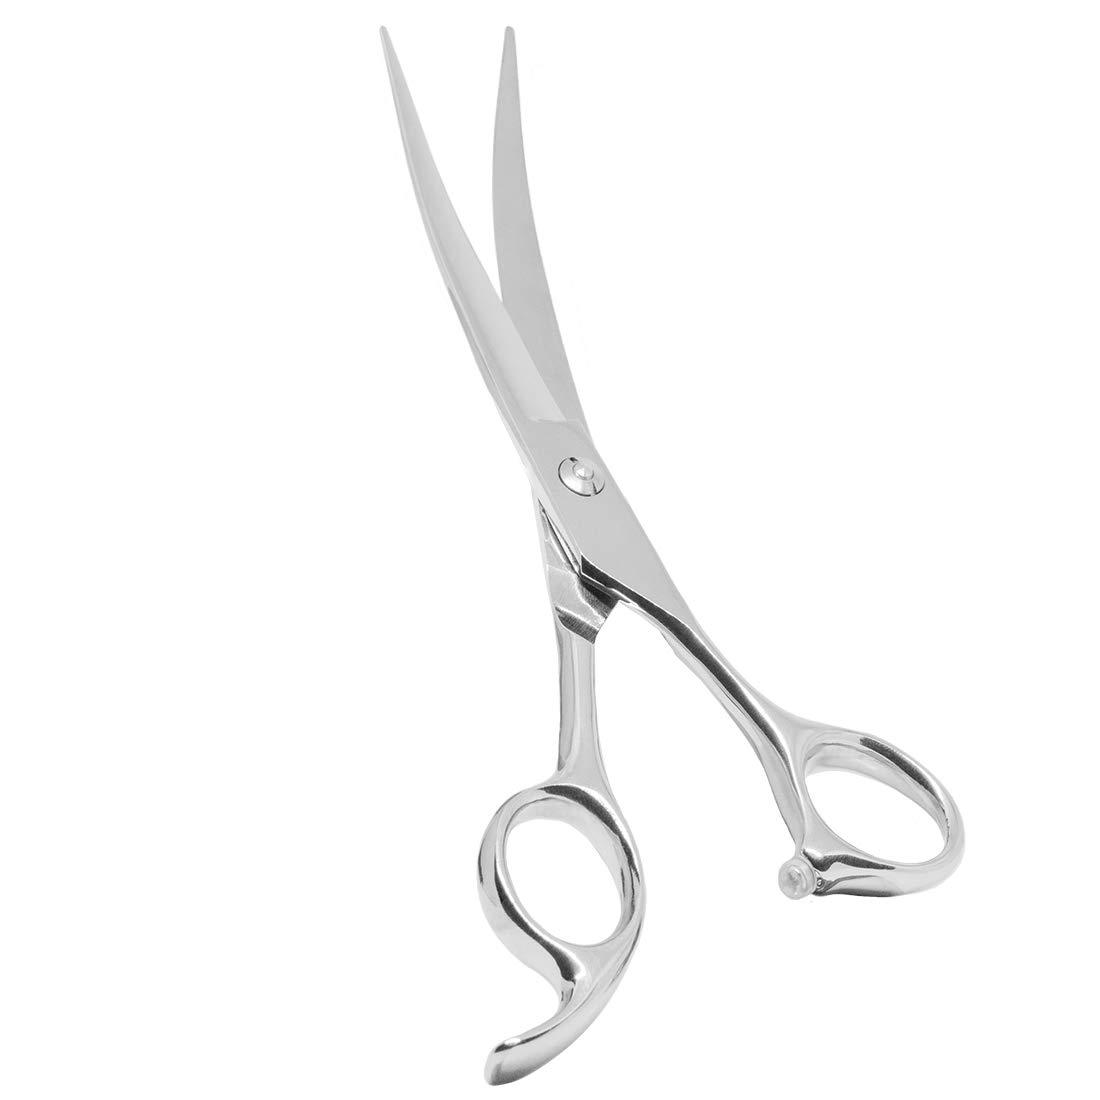 Dog grooming Scissors,Pet grooming Scissors,Thinning,Straight,curved Down Shears great for groomers and Home grooming